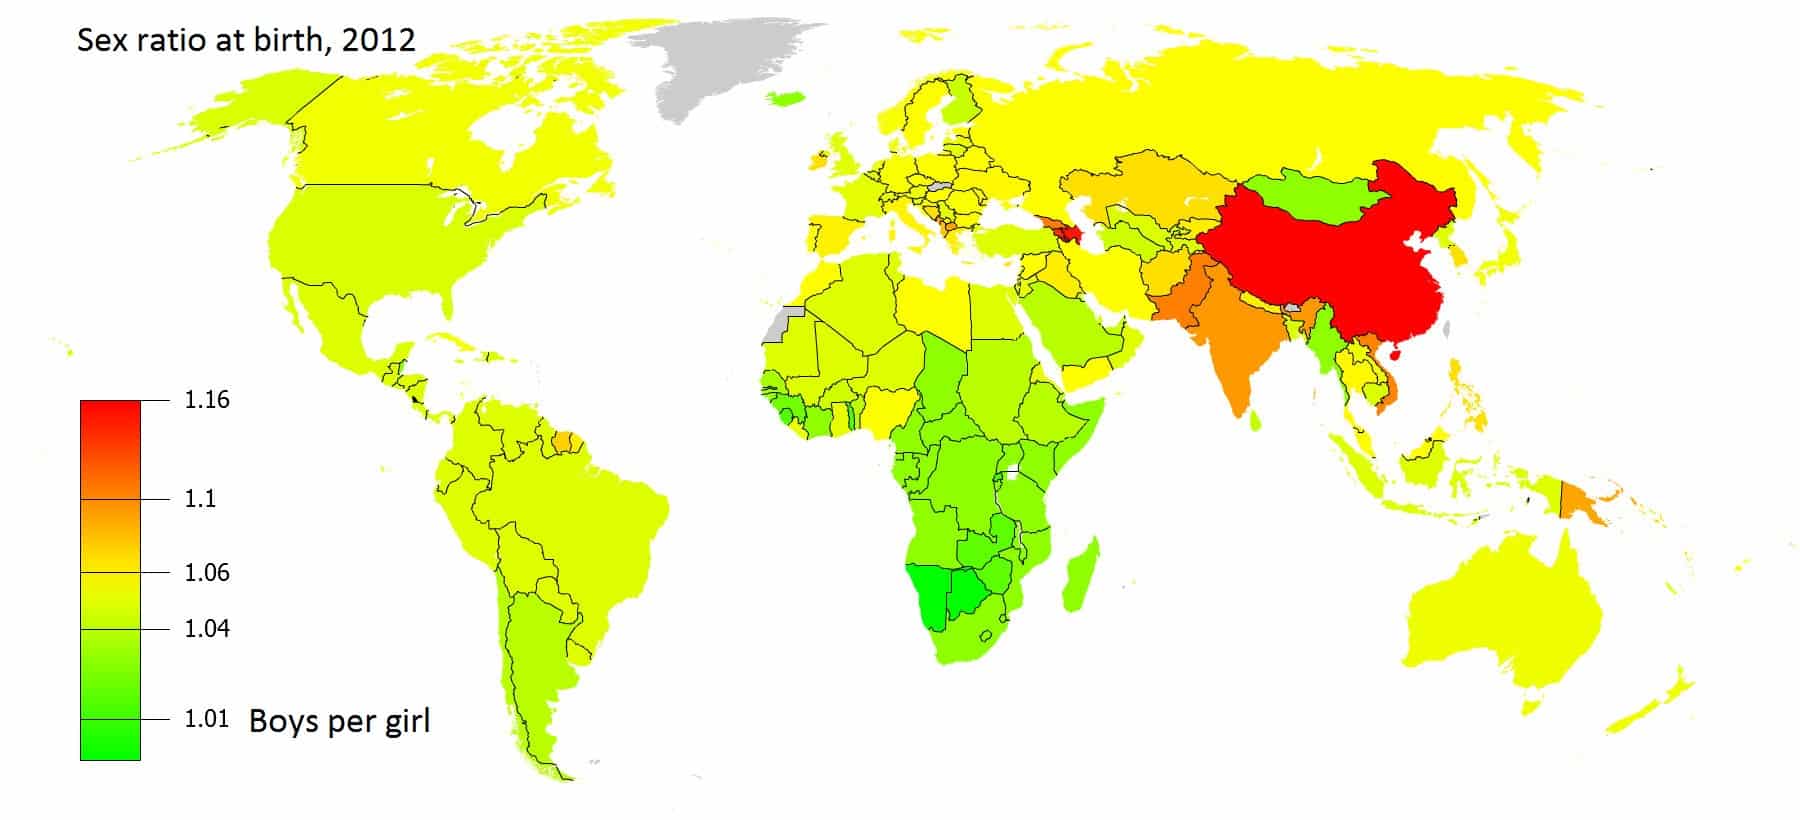 map showing world sex ratio at birth in 2012